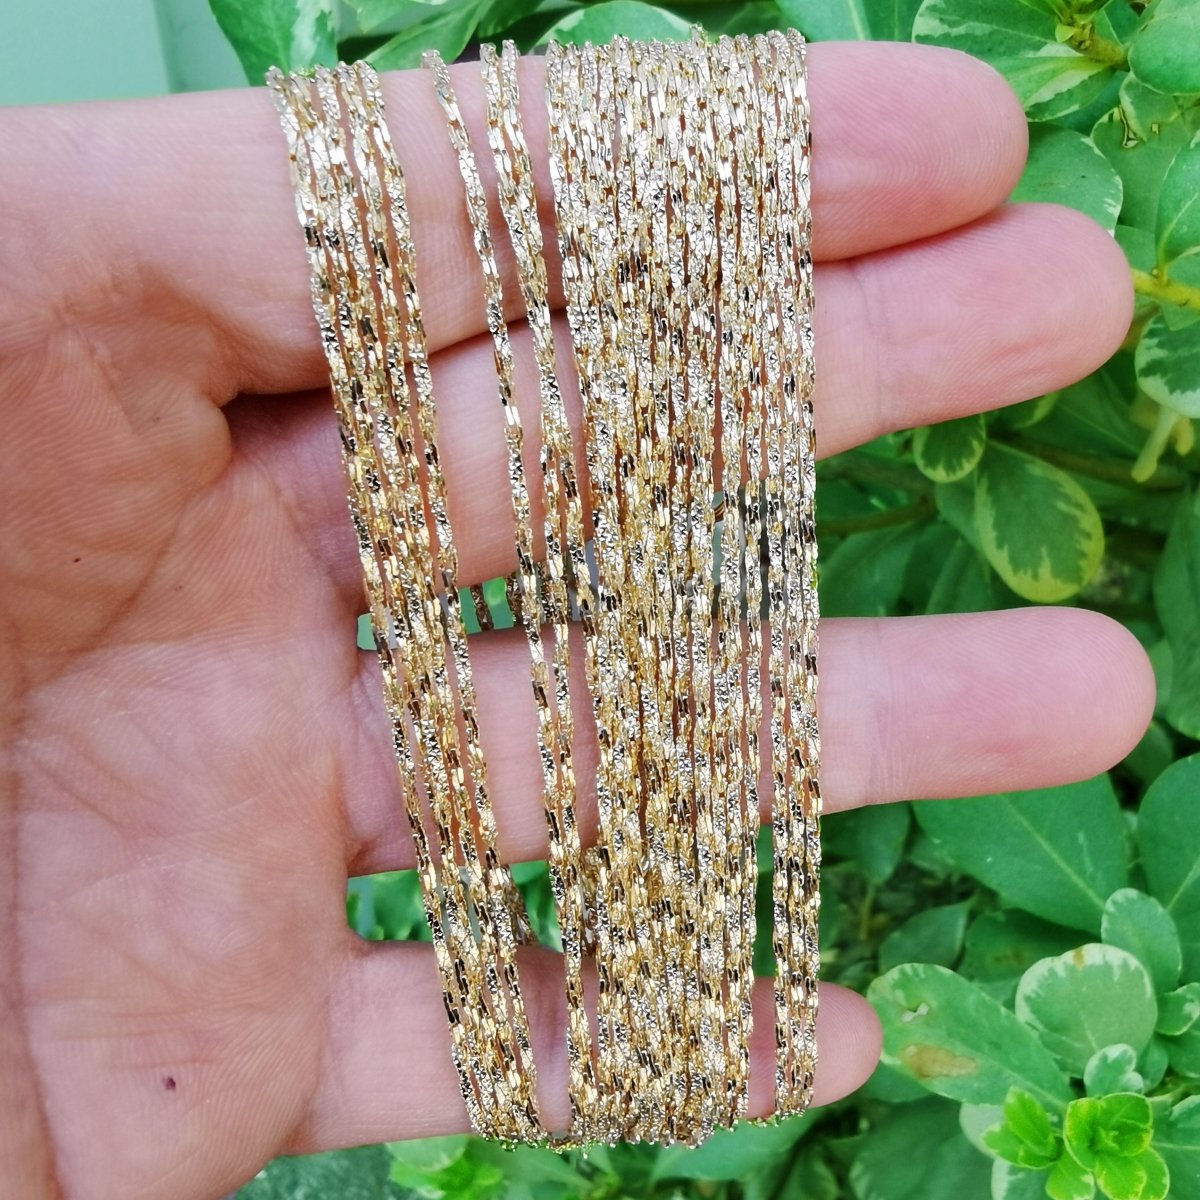 17.9'' Ready to Use 14K Gold Filled Flakes Singapore Necklace Chain, Layering Spiral Chain Dainty Necklace, for Pendant Necklace | CN-785 Clearance Pricing - DLUXCA